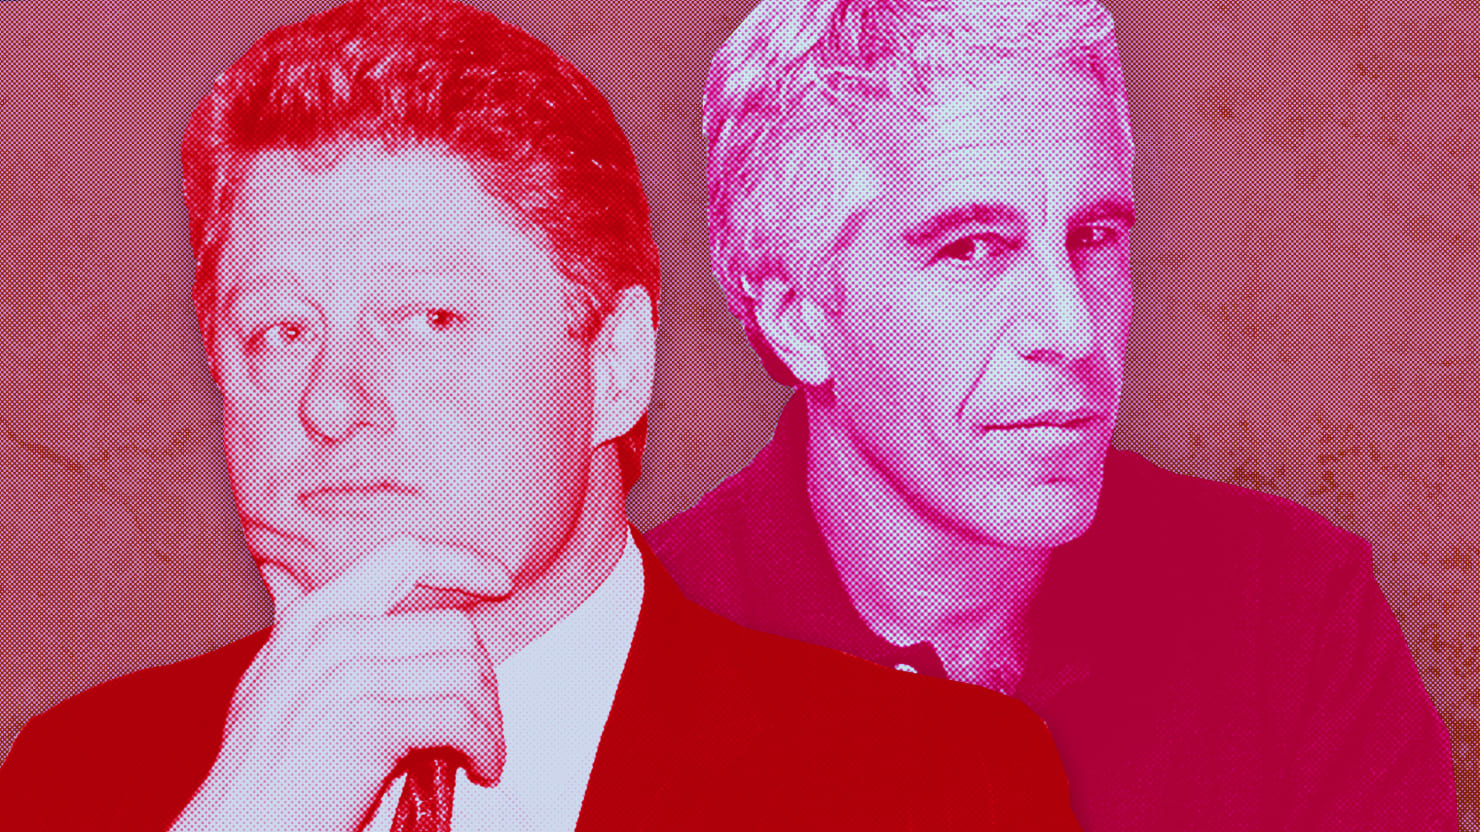 EXCLUSIVE: Jeffrey Epstein Visited Clinton White House Multiple Times in Early ’90s